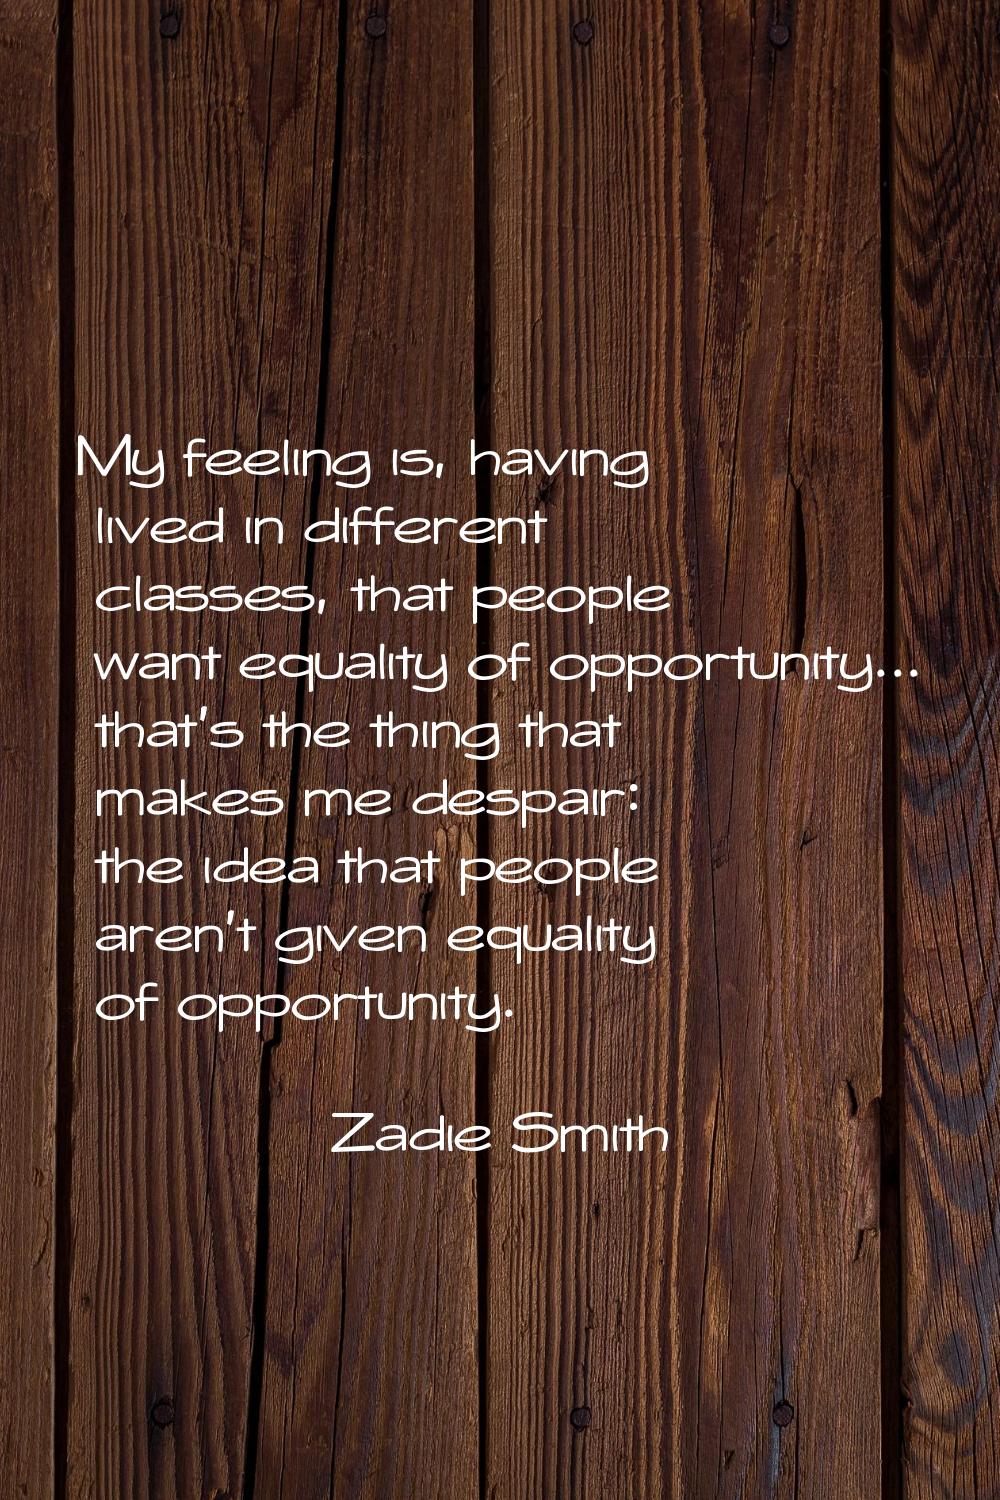 My feeling is, having lived in different classes, that people want equality of opportunity... that'